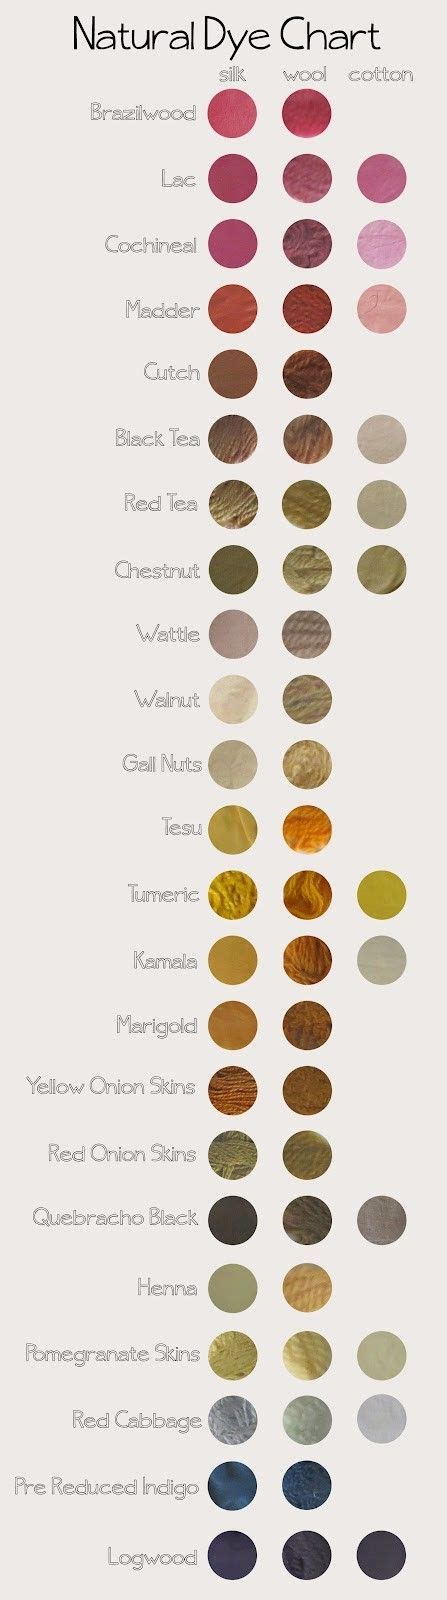 Natural Dye Chart In 2020 Natural Dye Fabric Natural Dyes How To